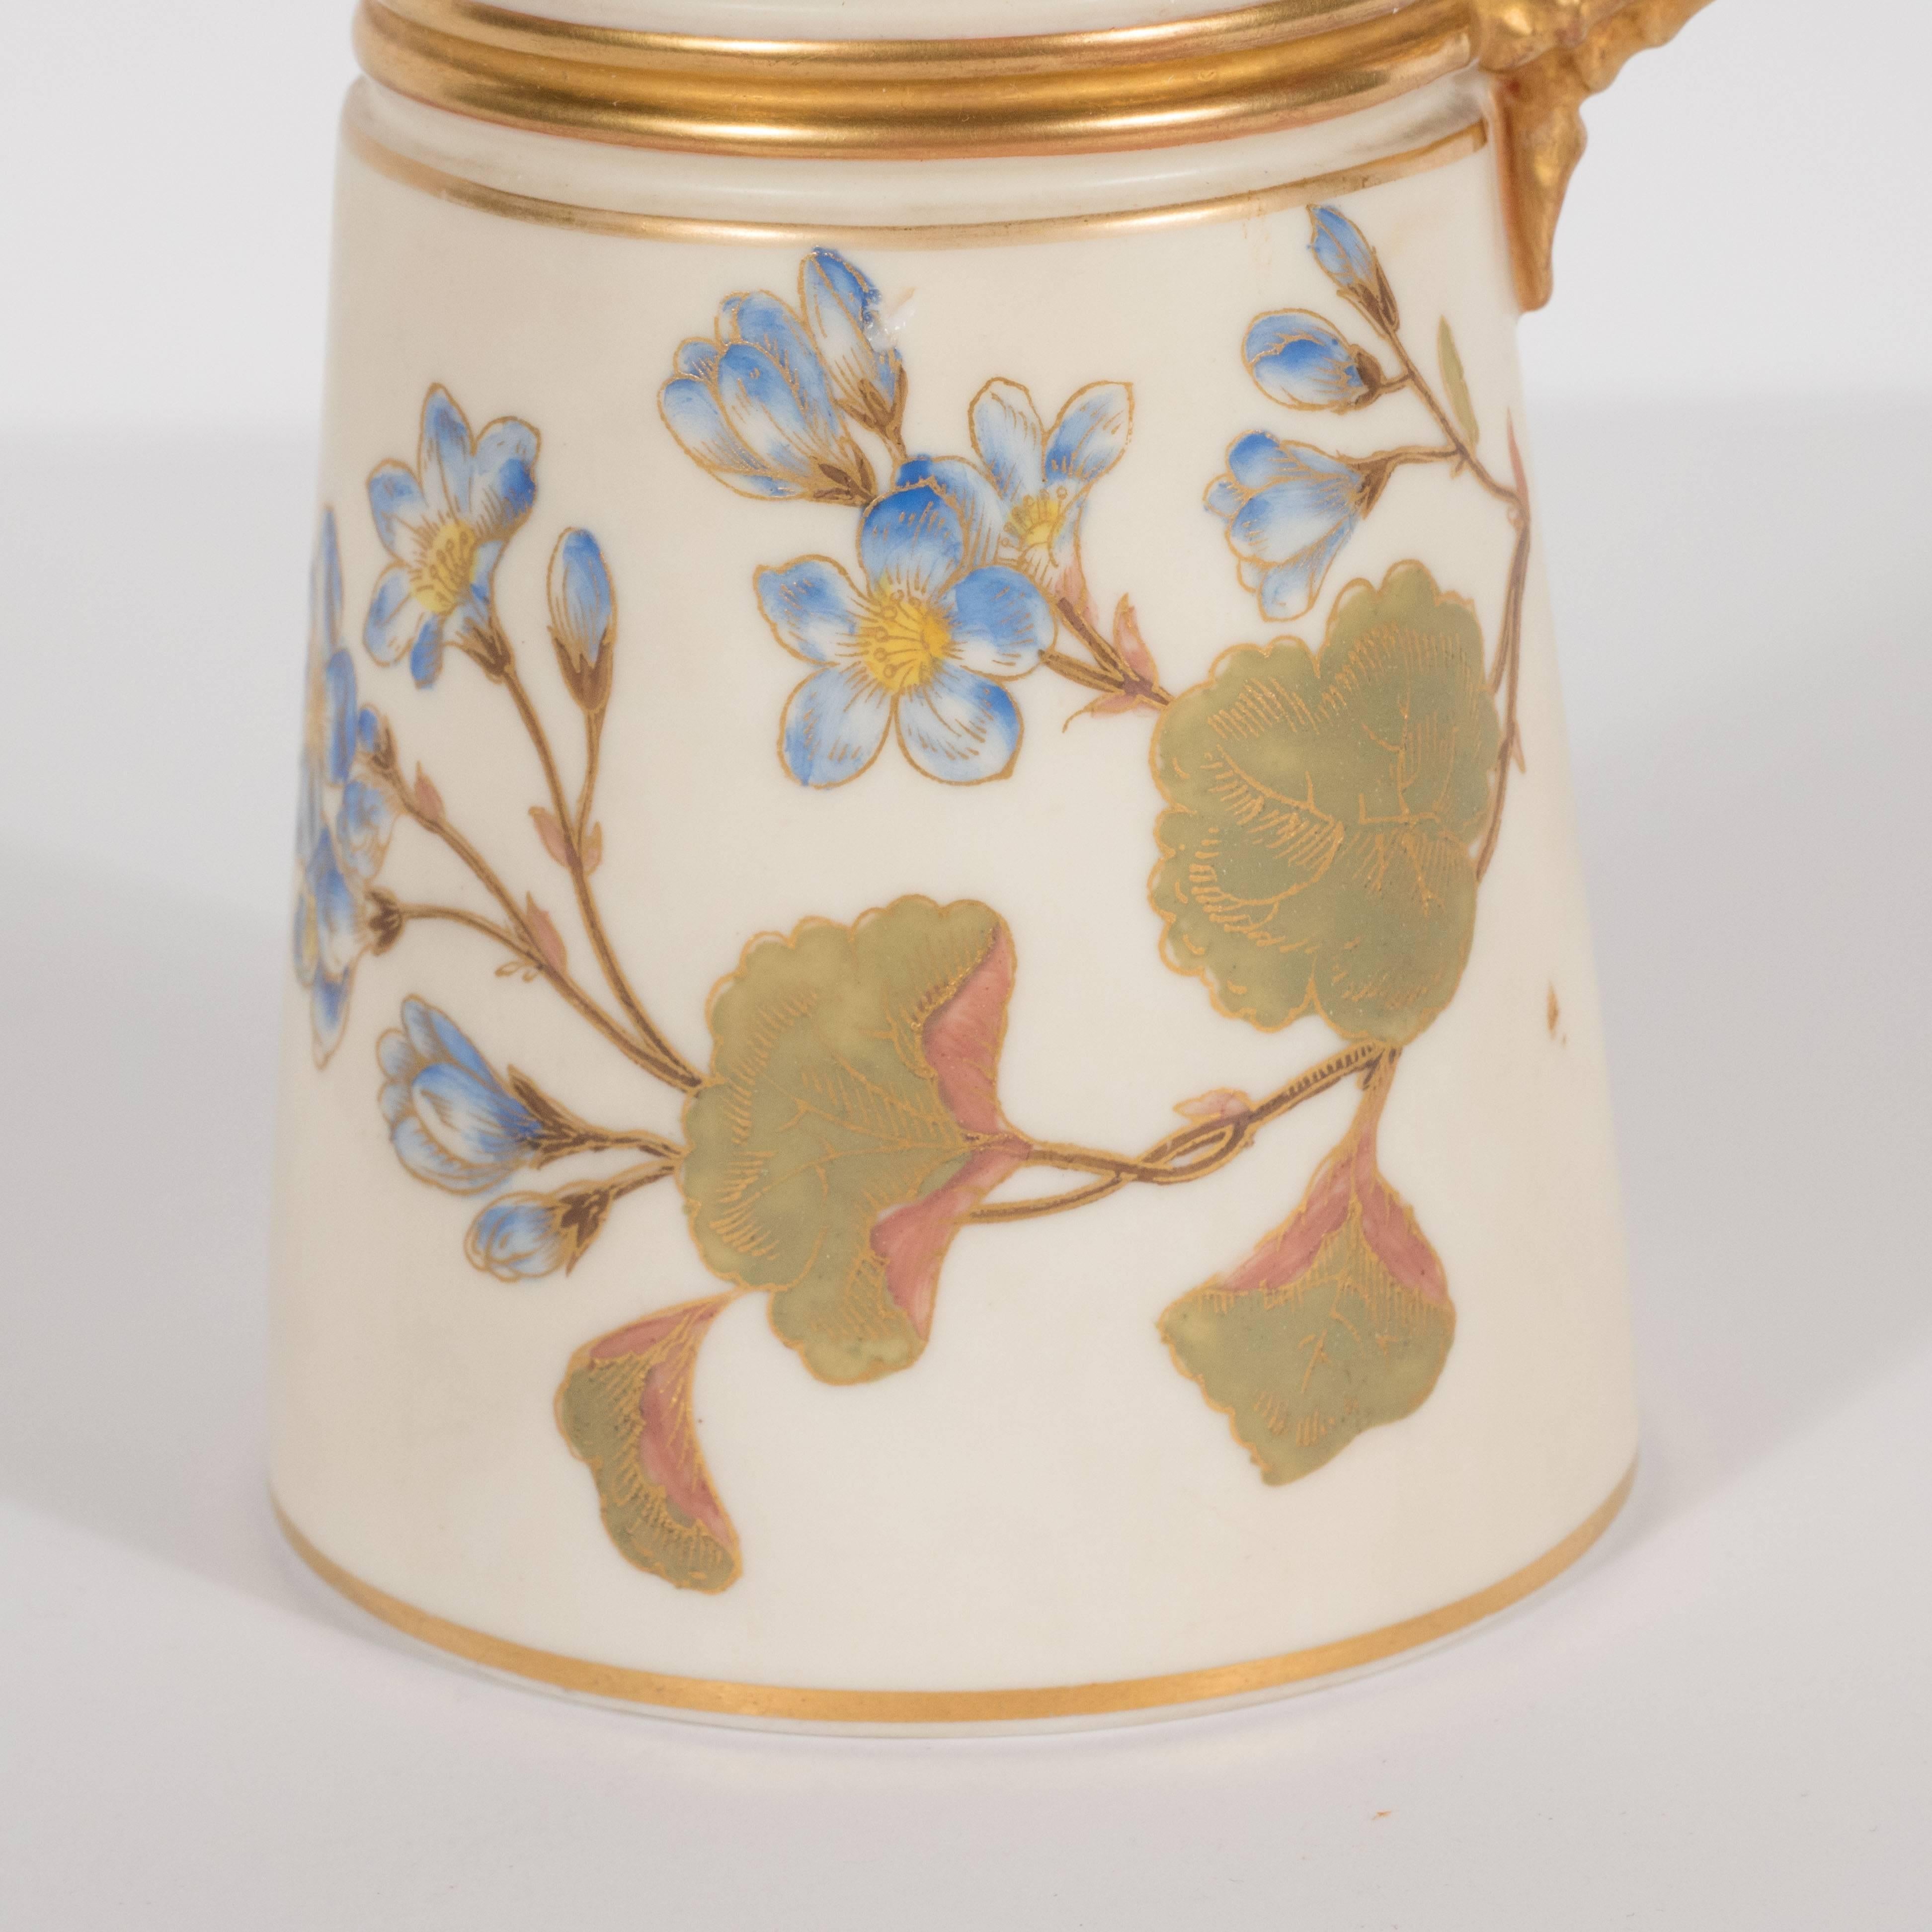 Early 20th Century Hand-Painted Gilded Art Nouveau Bonn Royal Worcester Vase with Floral Motif For Sale